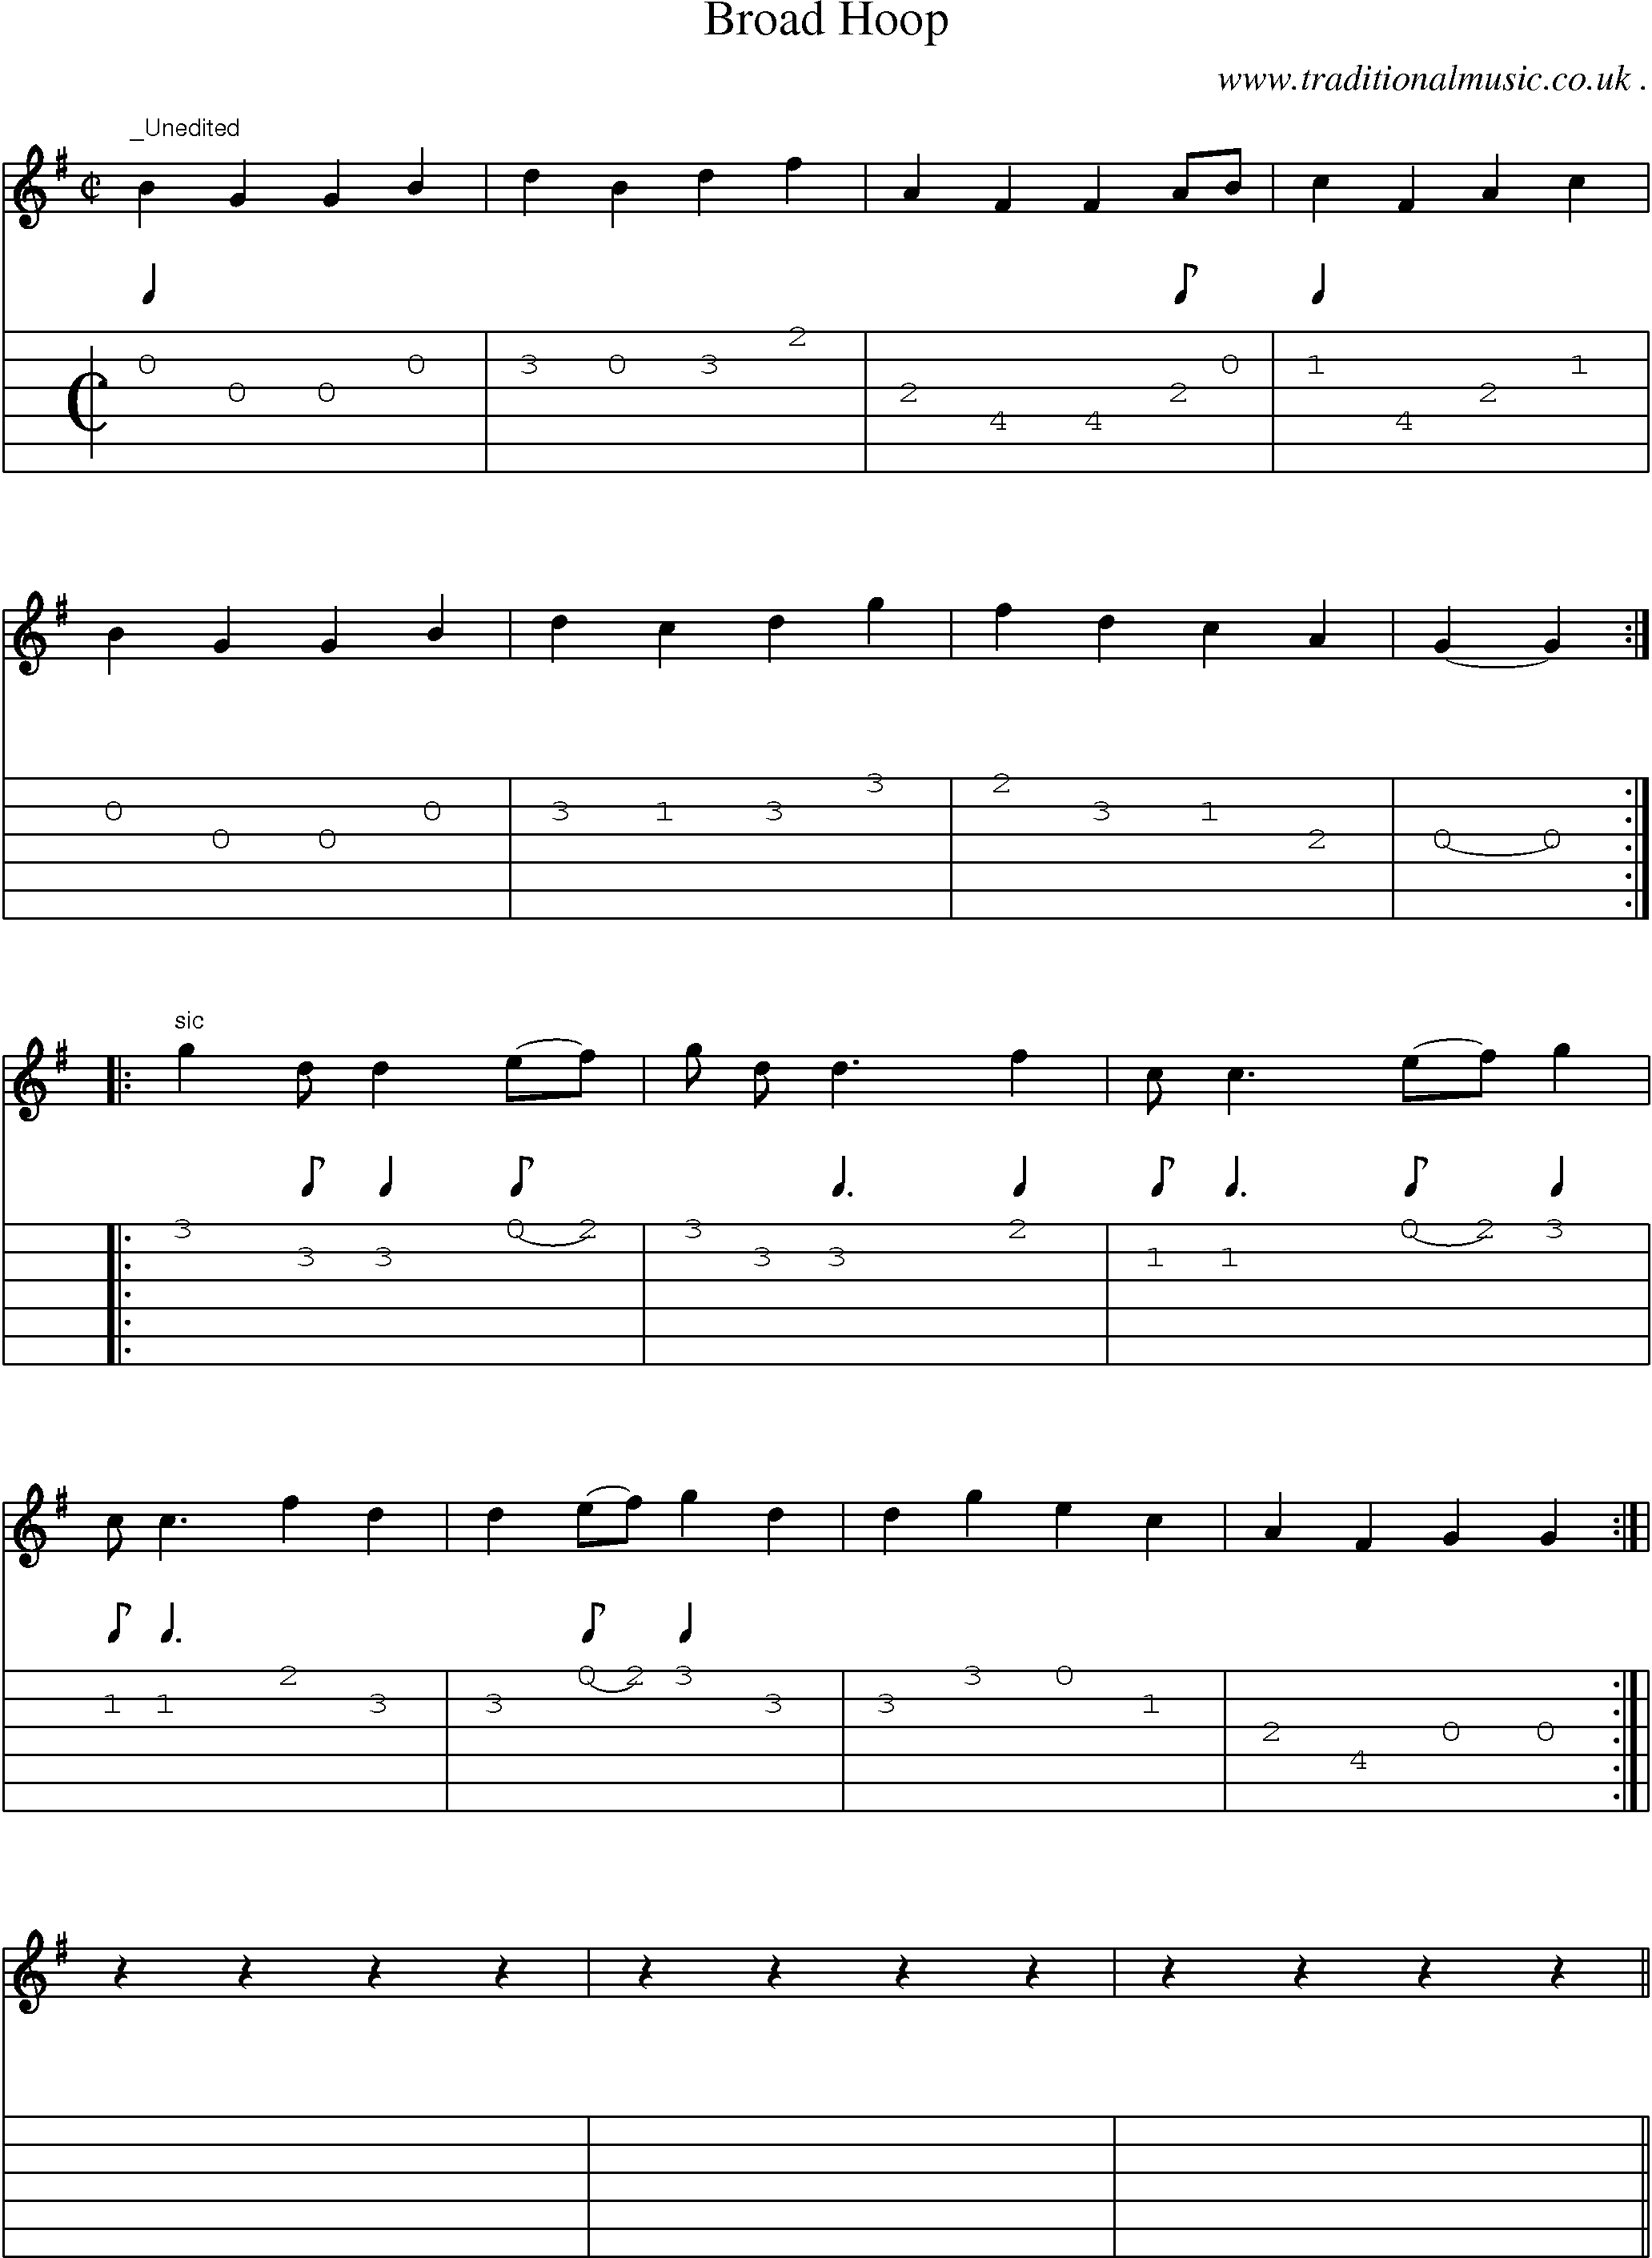 Sheet-Music and Guitar Tabs for Broad Hoop